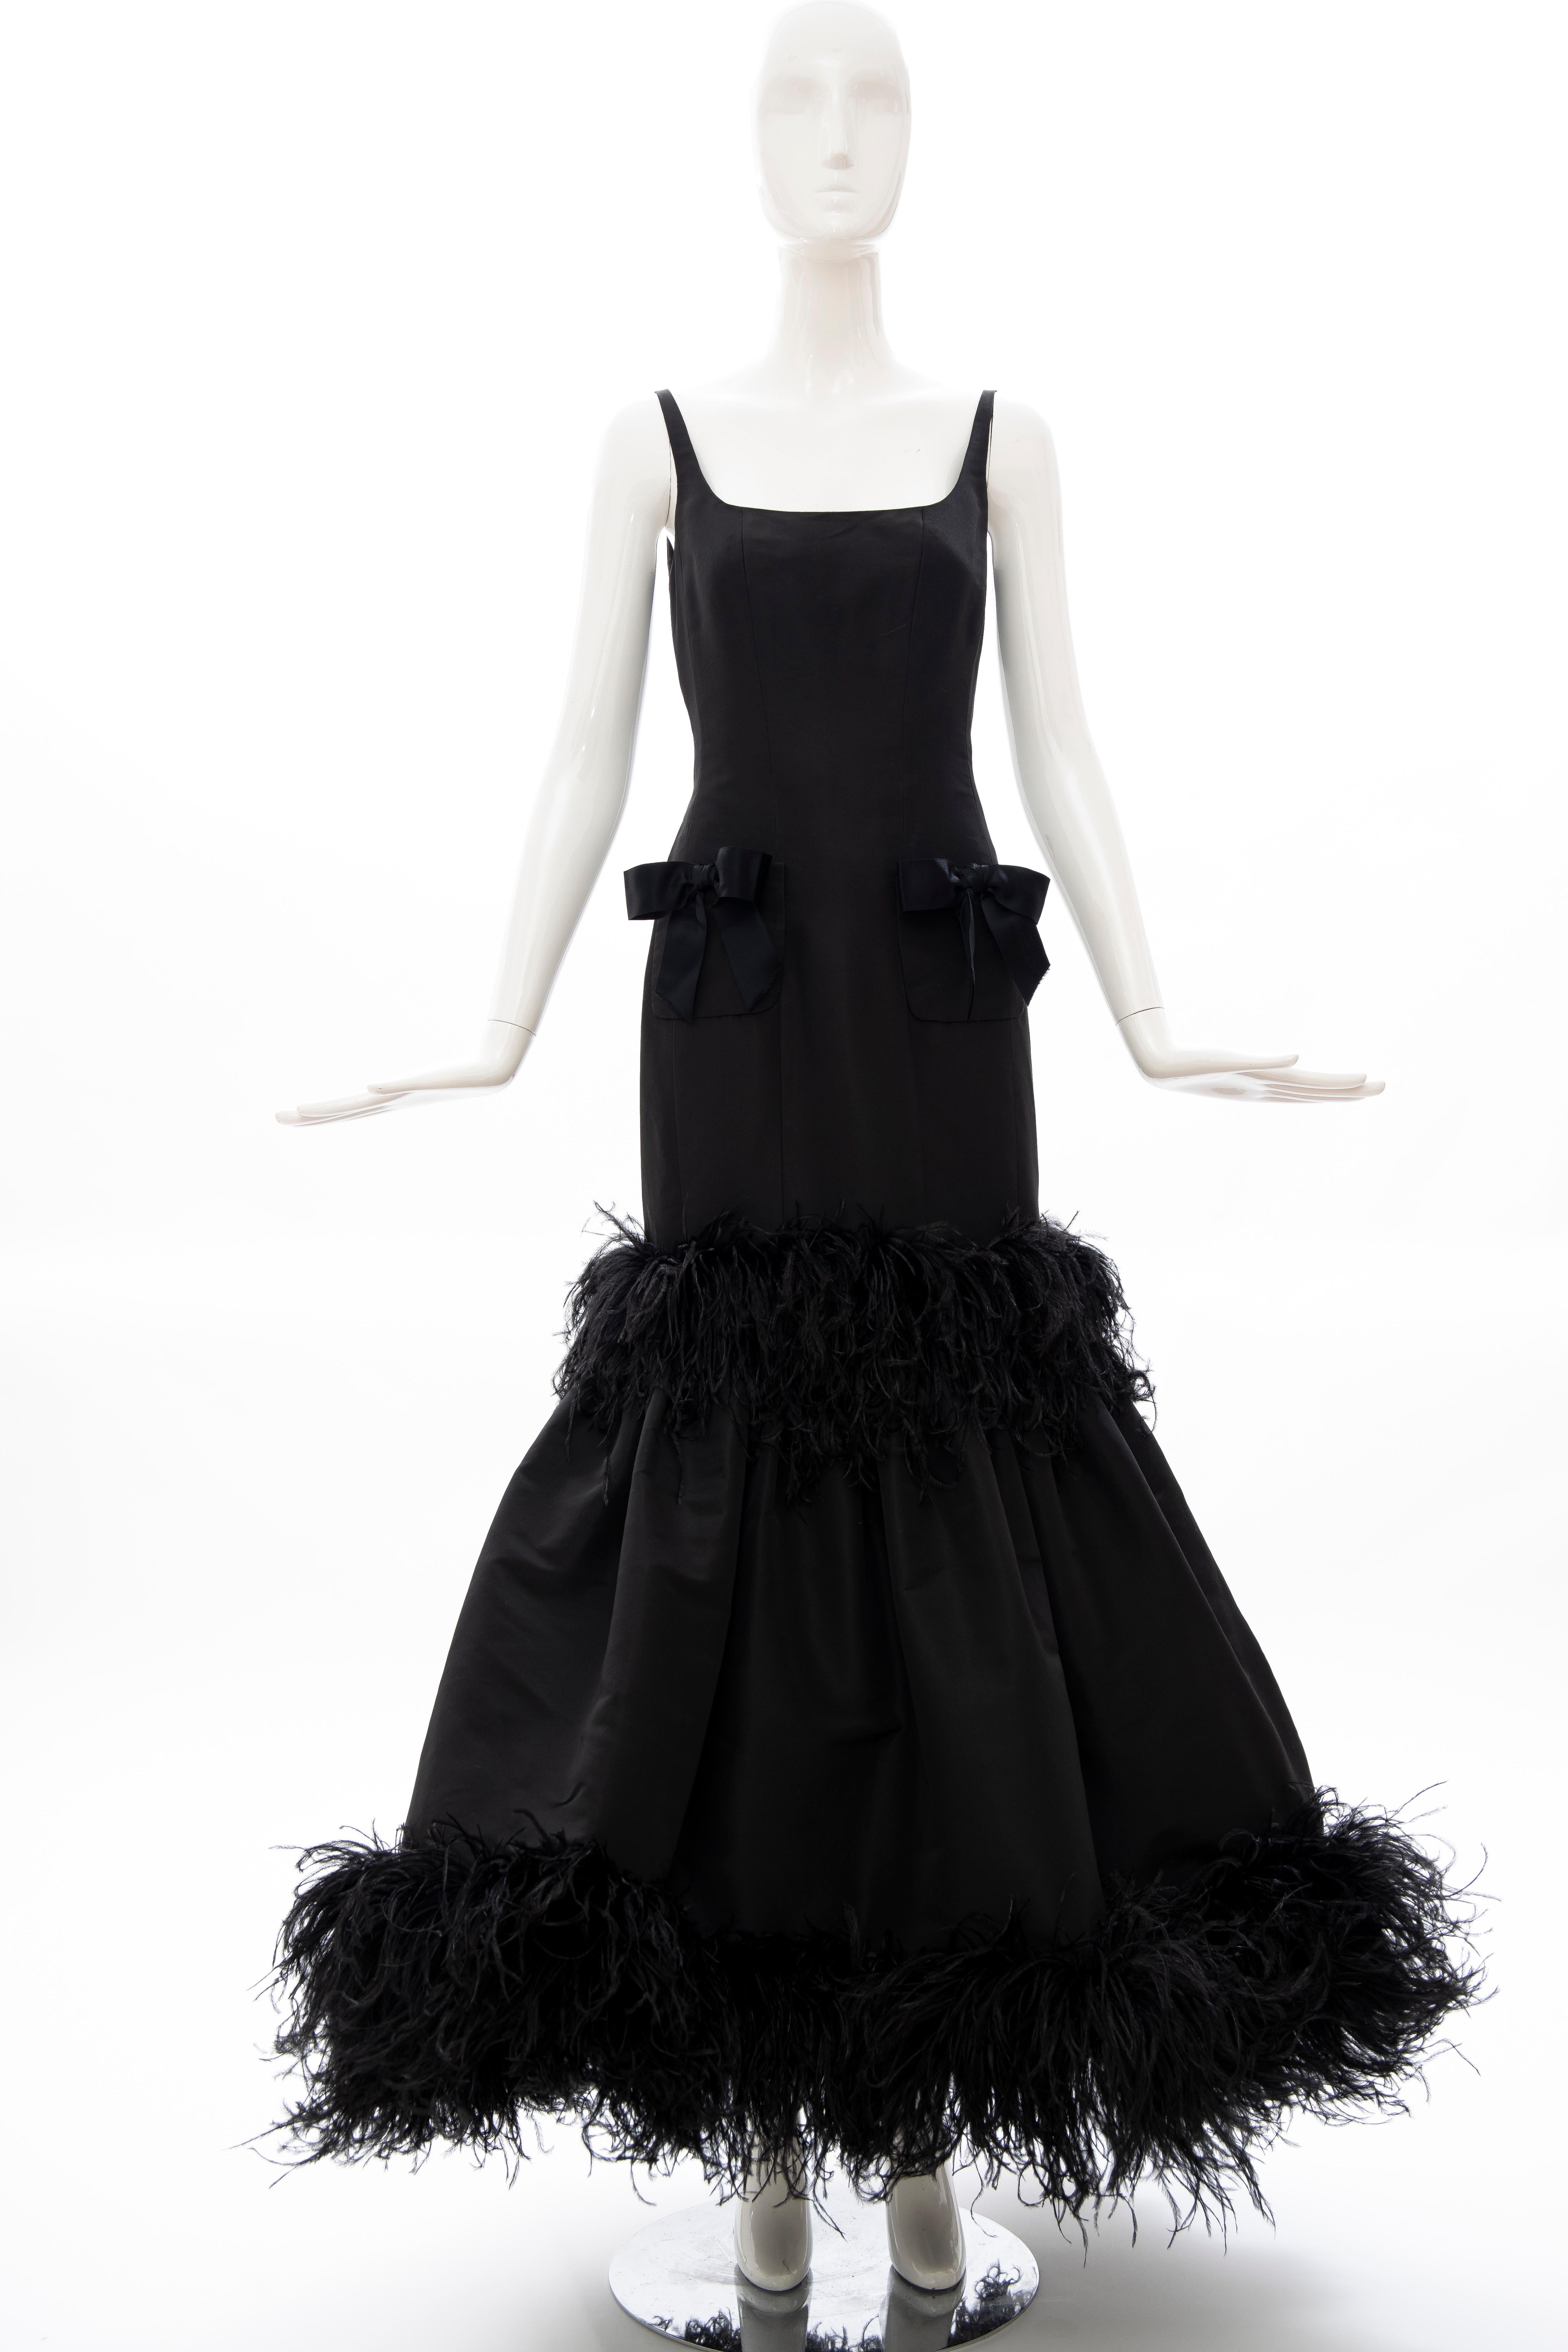 Oscar de La Renta Runway, Fall 2004 (Look 49) black silk faille evening dress with two front pockets with black silk satin bows, embroidered black feathers, tulle underskirt. concealed back zip and hook-and-eye closure, fully lined in silk.

US.